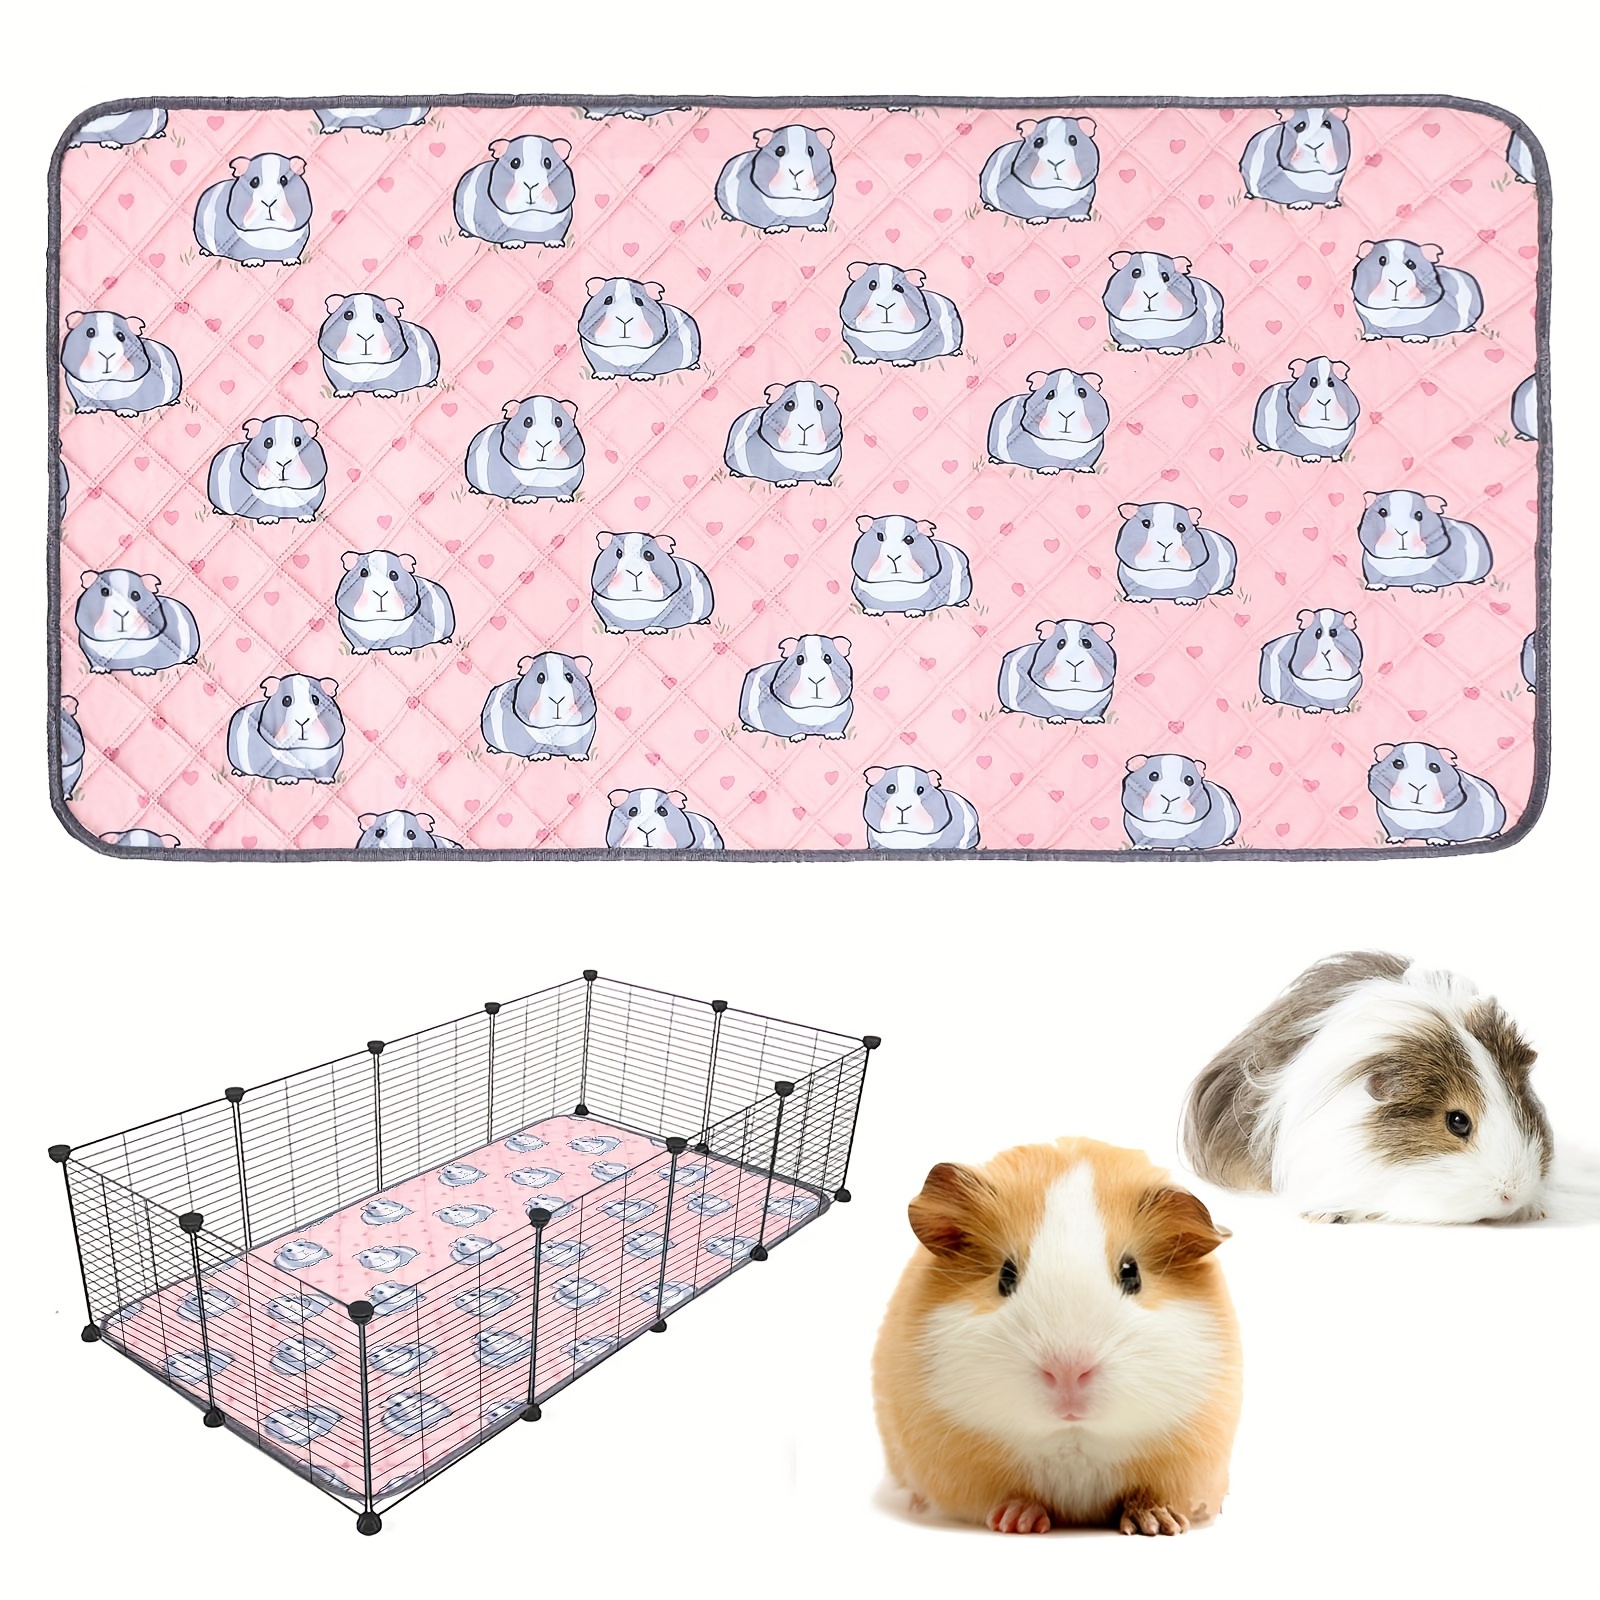 

1pc Guinea Hamster Cage Mat, Pee Pad, Washable Small Pet Bedding, Waterproof Super Absorbent Guinea Hamster Pee Pad, Non-slip Mat For Small Animals, Rabbit, Hamster - 24" X 47